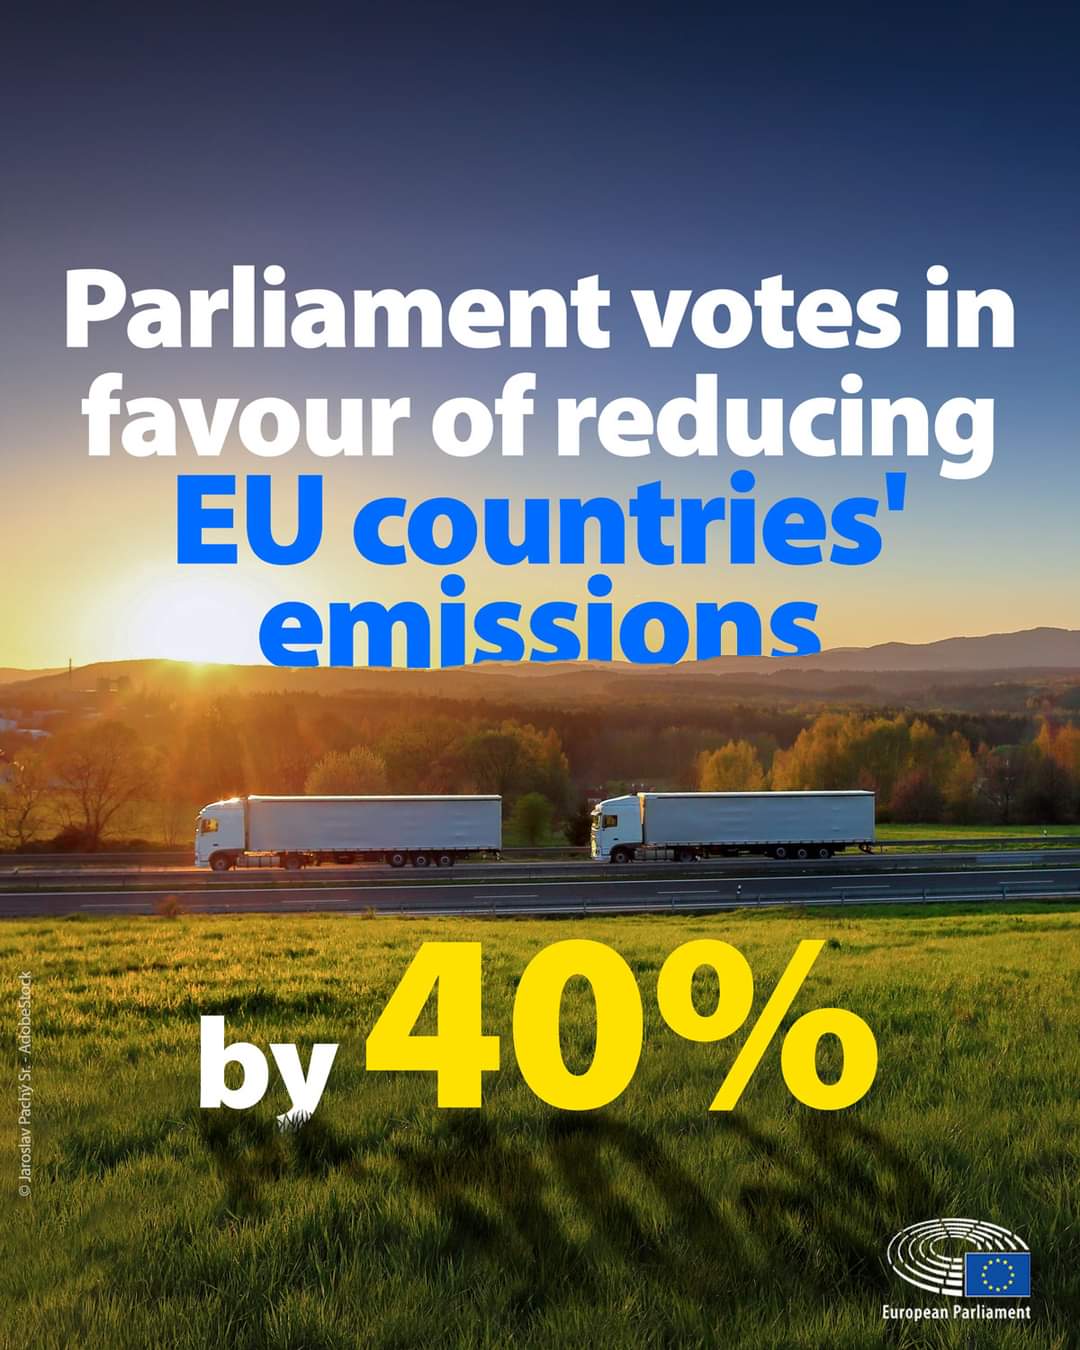 Reducing EU countries' emissions by 40%